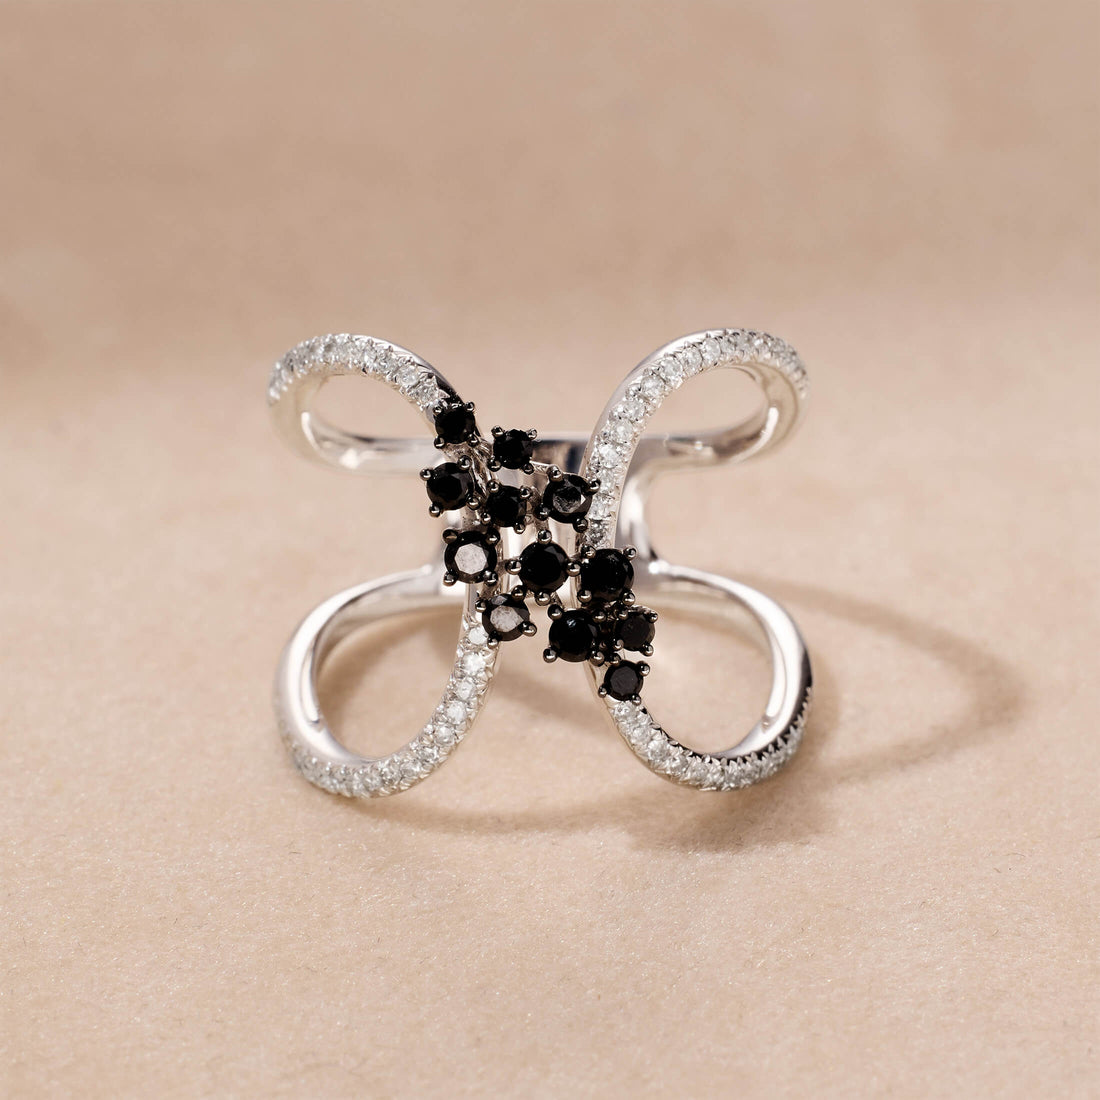 Double-row Statement Ring with White and Black Diamonds